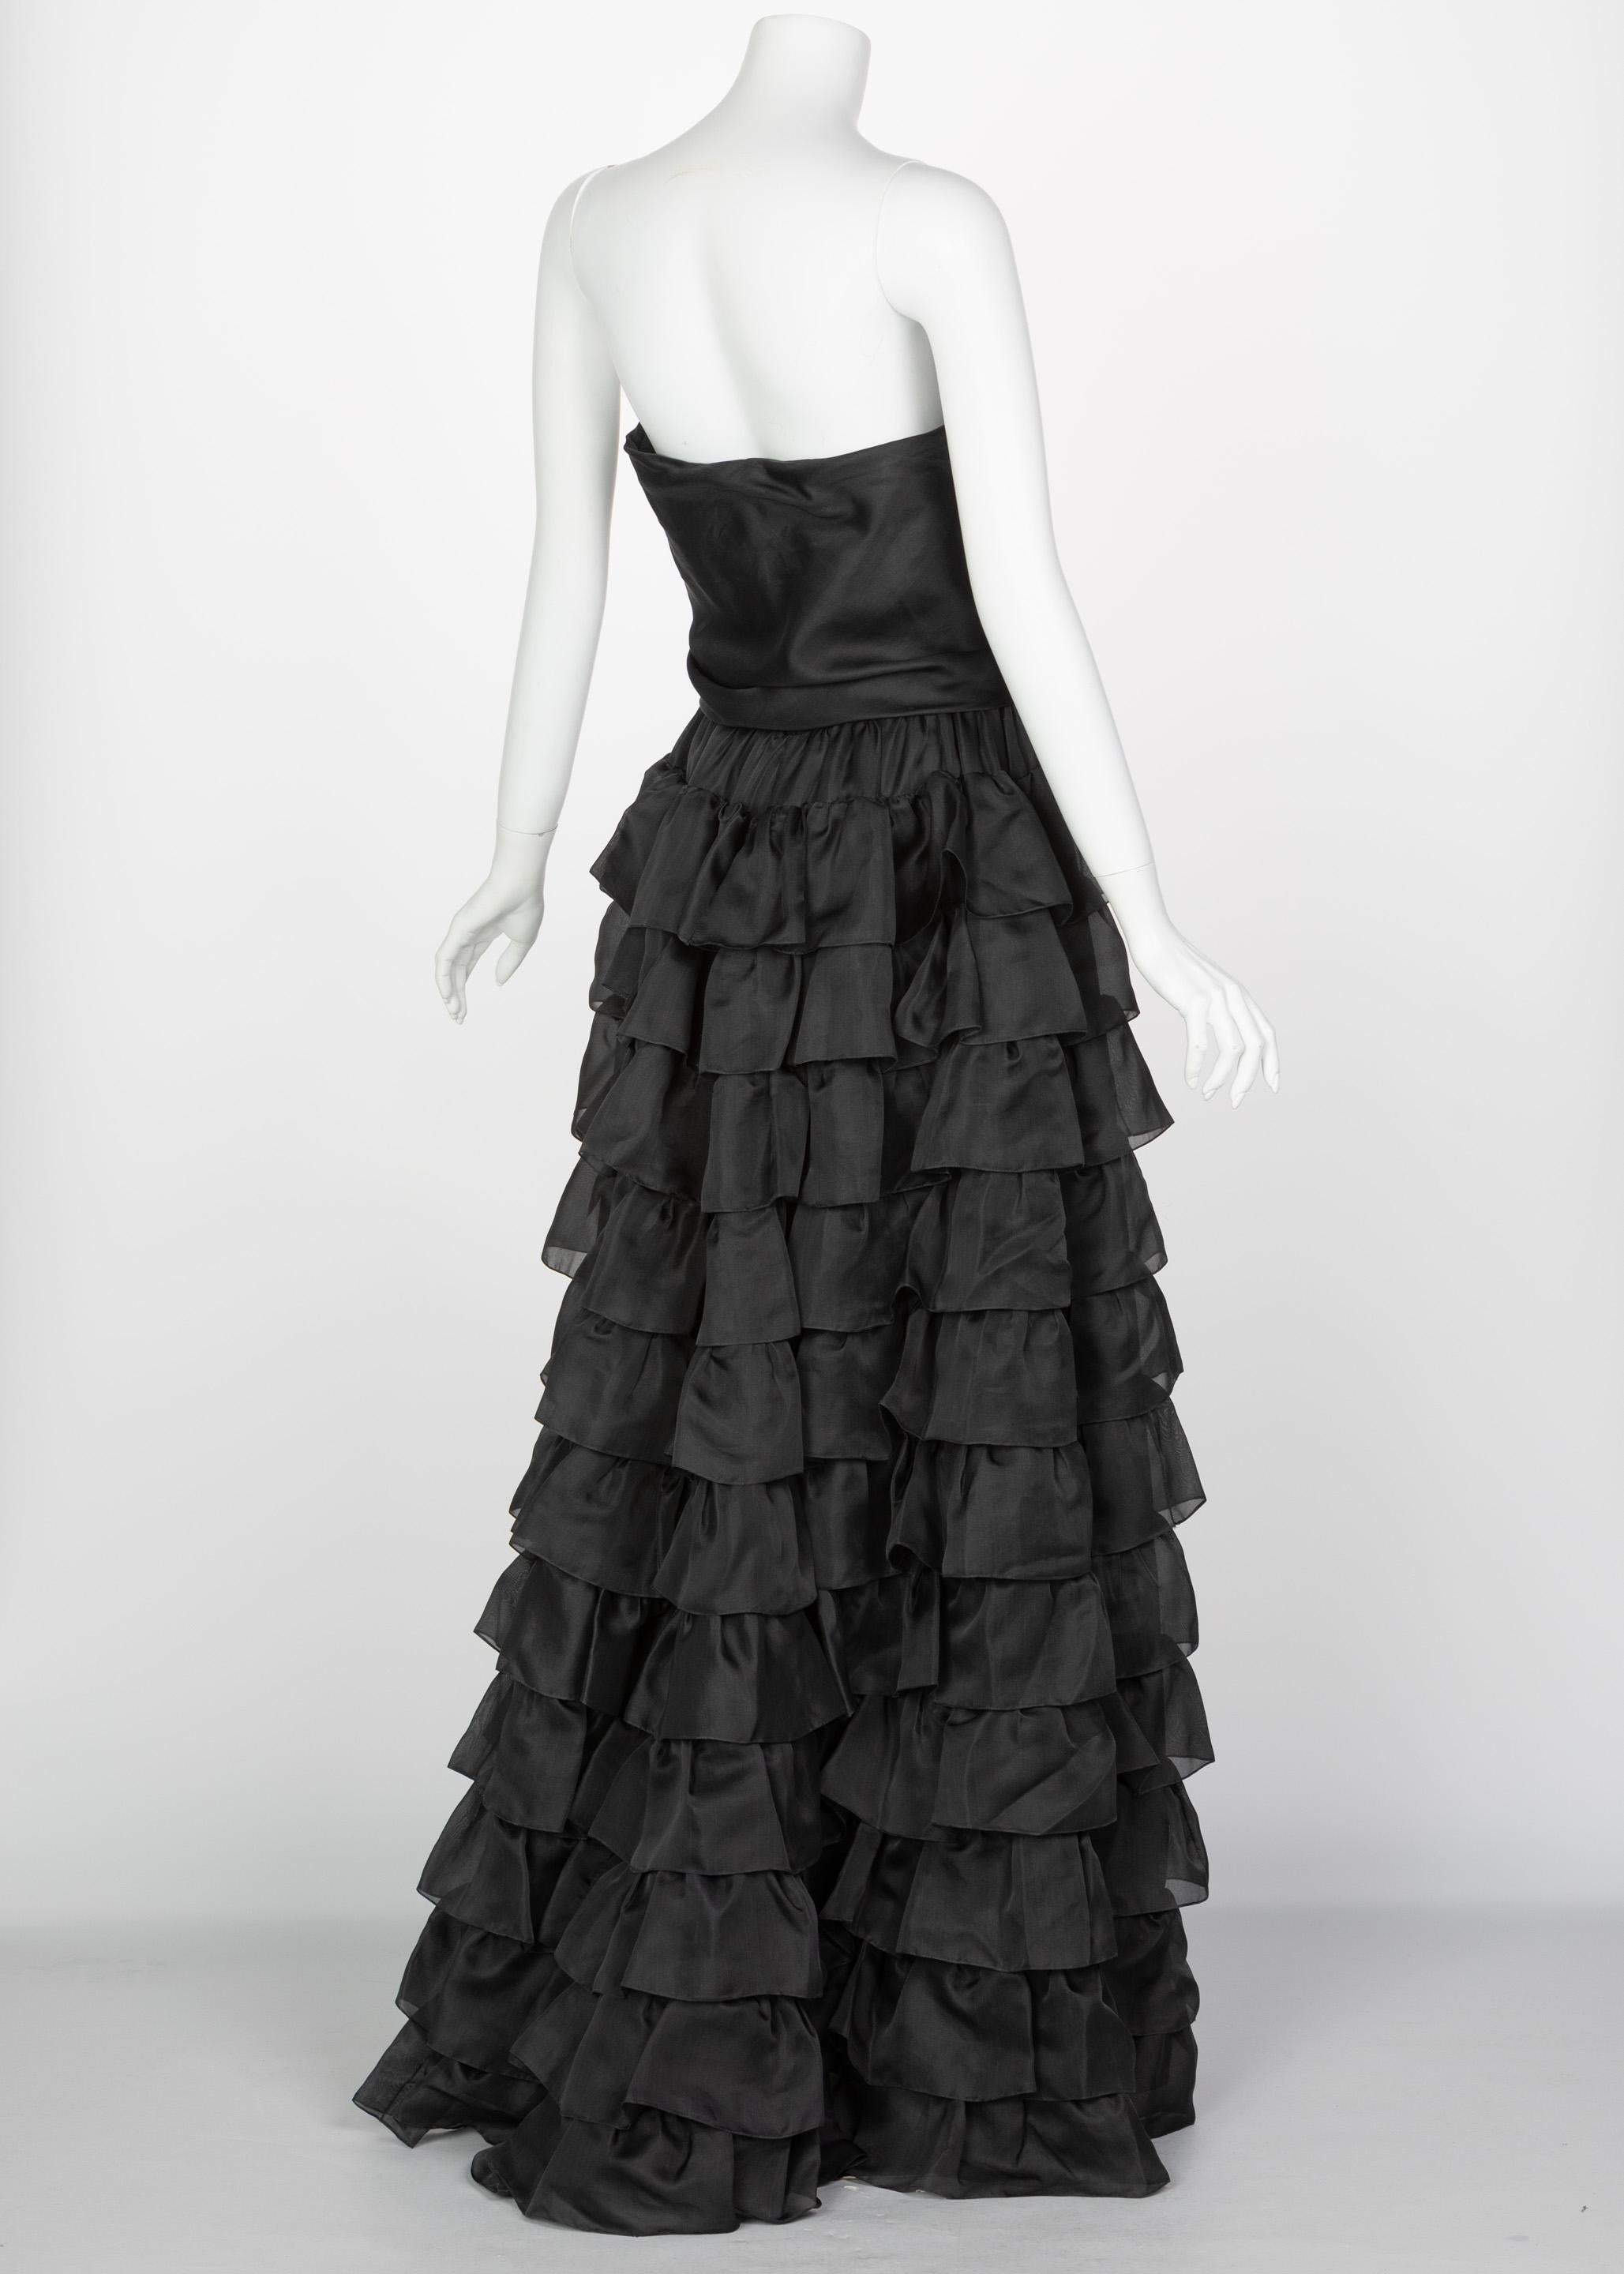 Women's Vintage Givenchy Numbered Haute Couture Black Strapless Ruffled Gown, 1970s